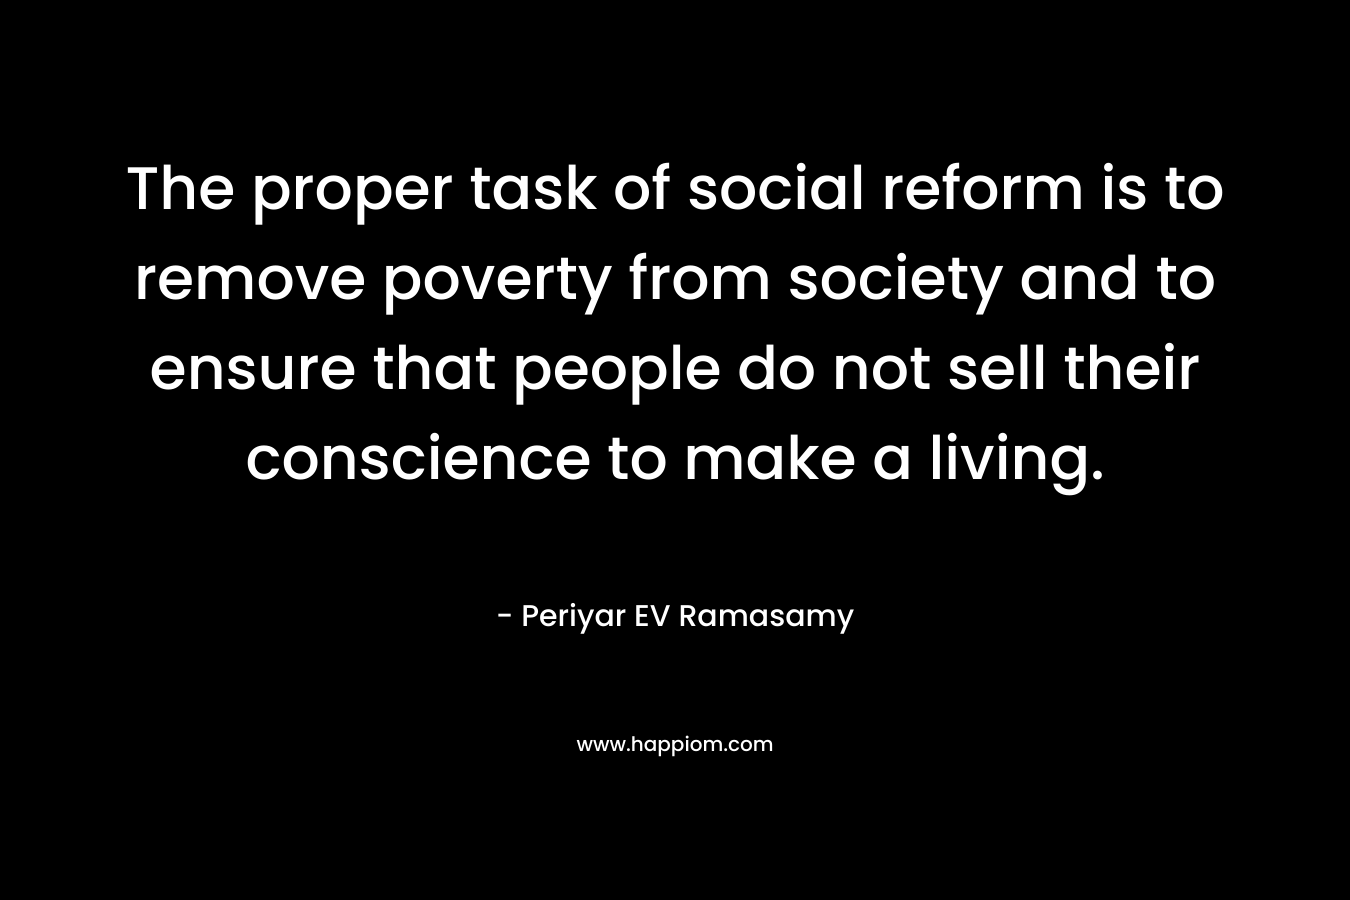 The proper task of social reform is to remove poverty from society and to ensure that people do not sell their conscience to make a living. – Periyar EV Ramasamy